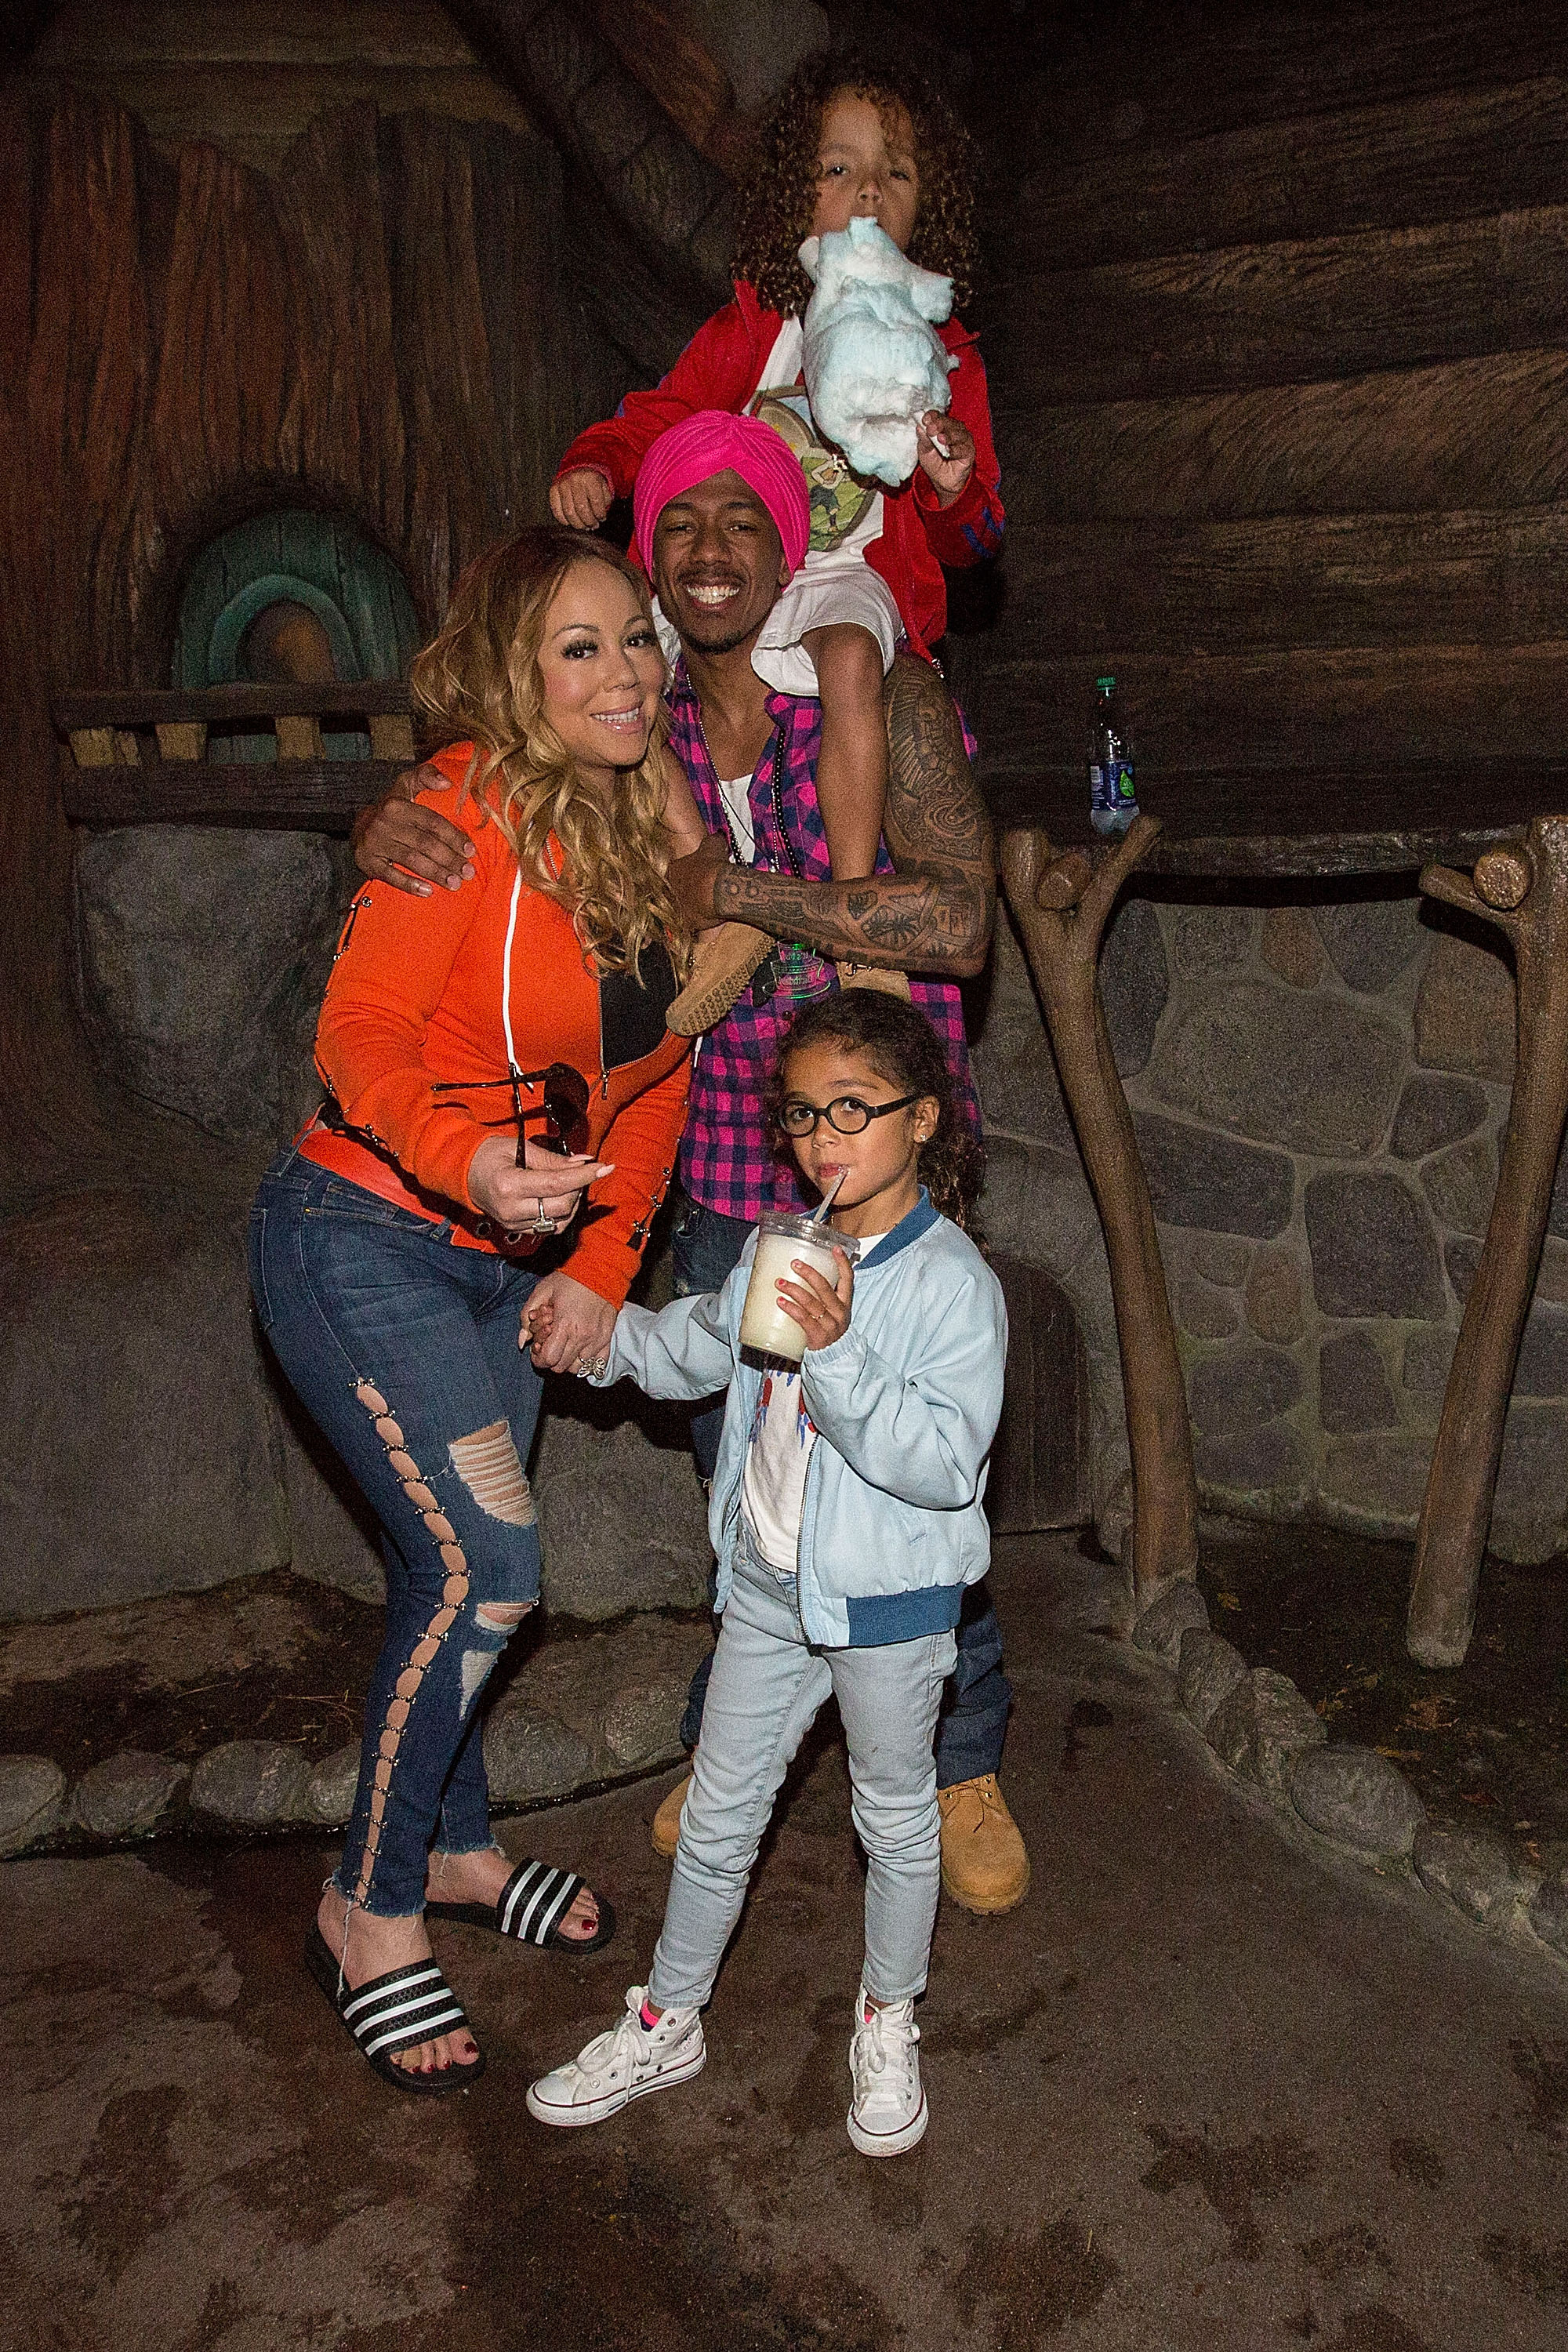 Mariah Carey and Nick Cannon and their kids